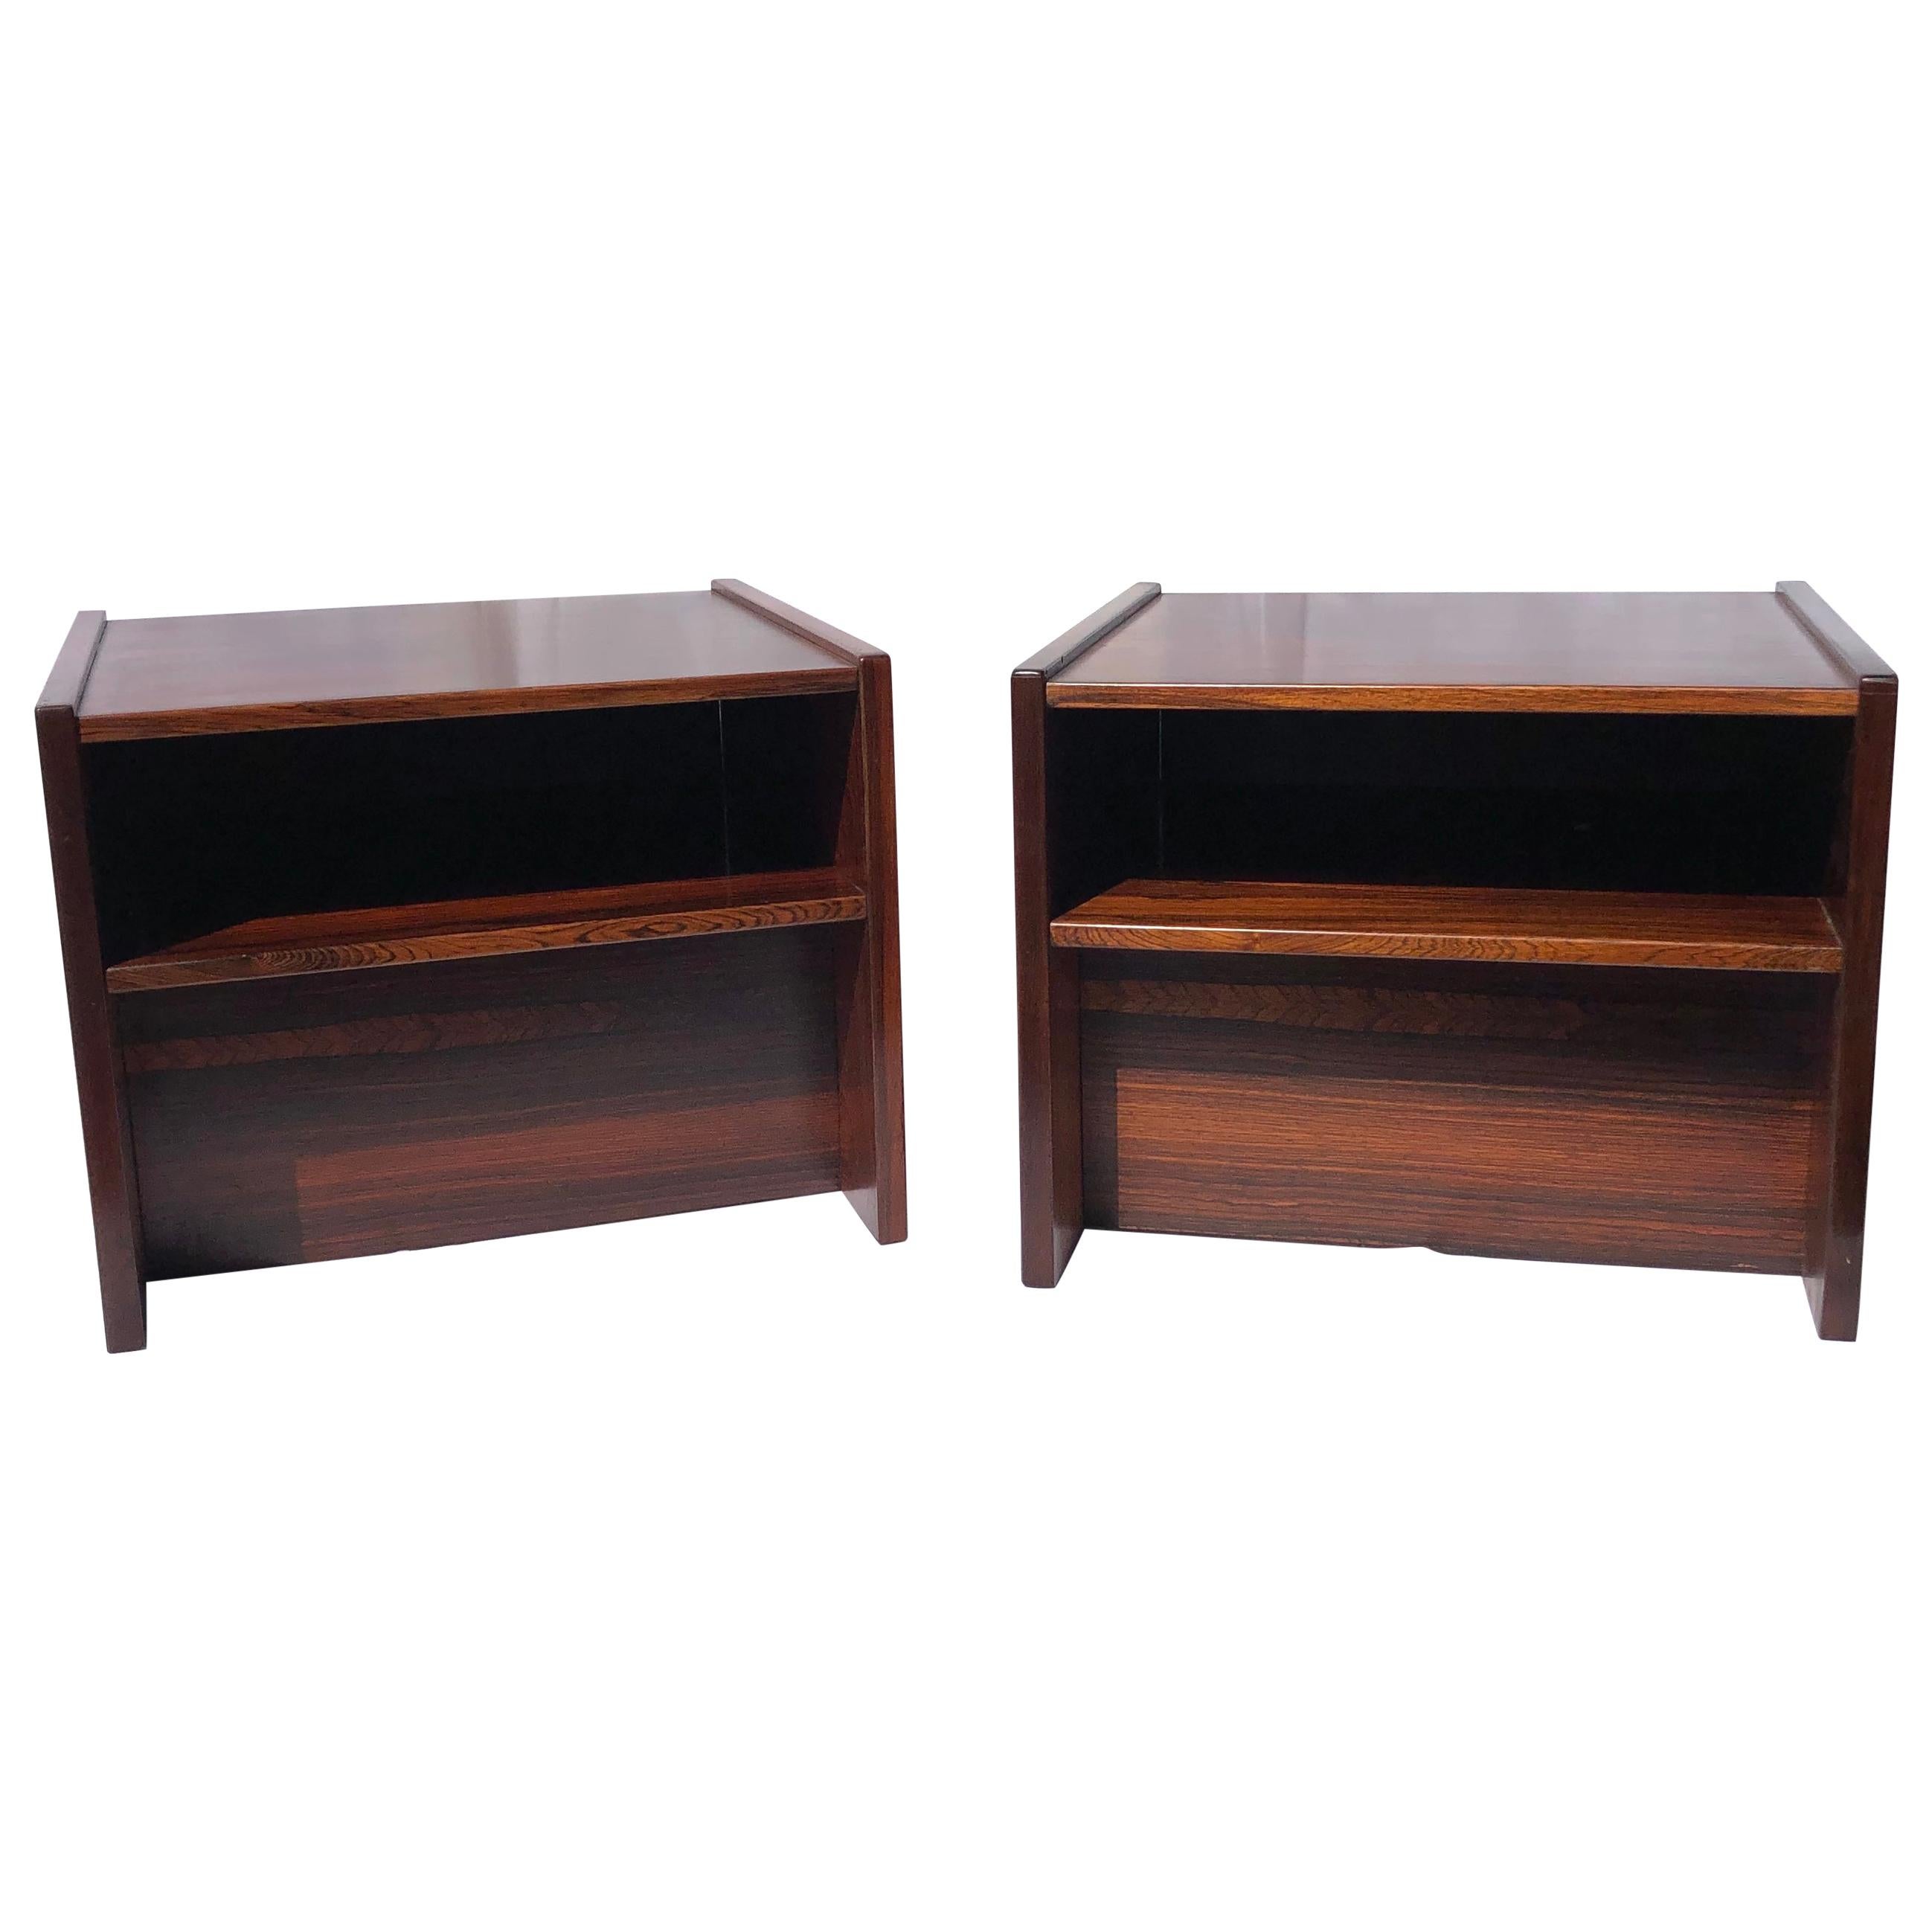 Pair of Mid Century Rosewood Bedside Tables / Cube Nightstands, Danish, 1970s